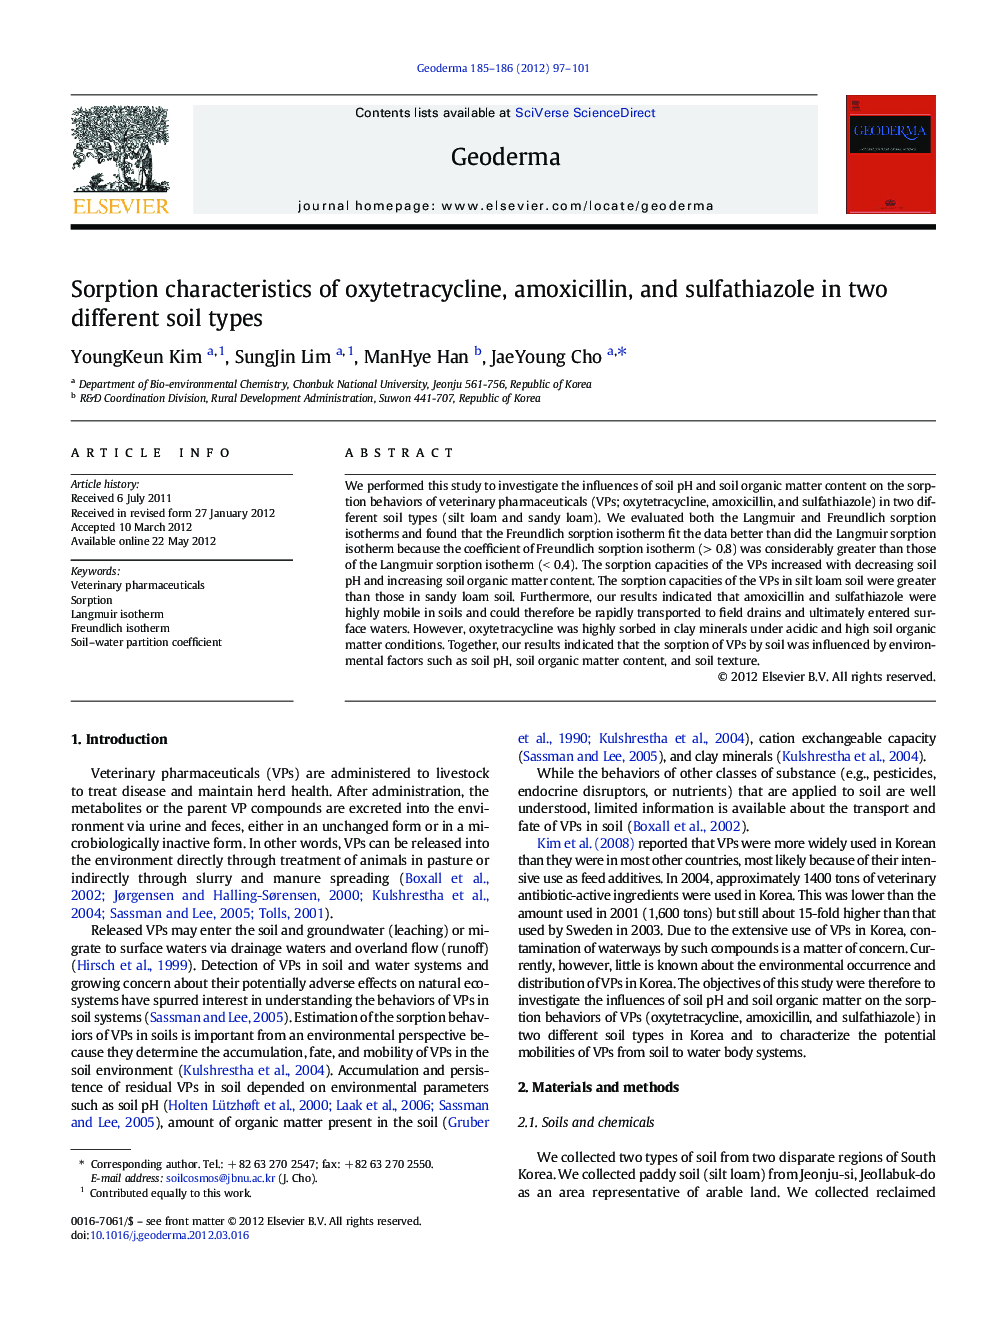 Sorption characteristics of oxytetracycline, amoxicillin, and sulfathiazole in two different soil types